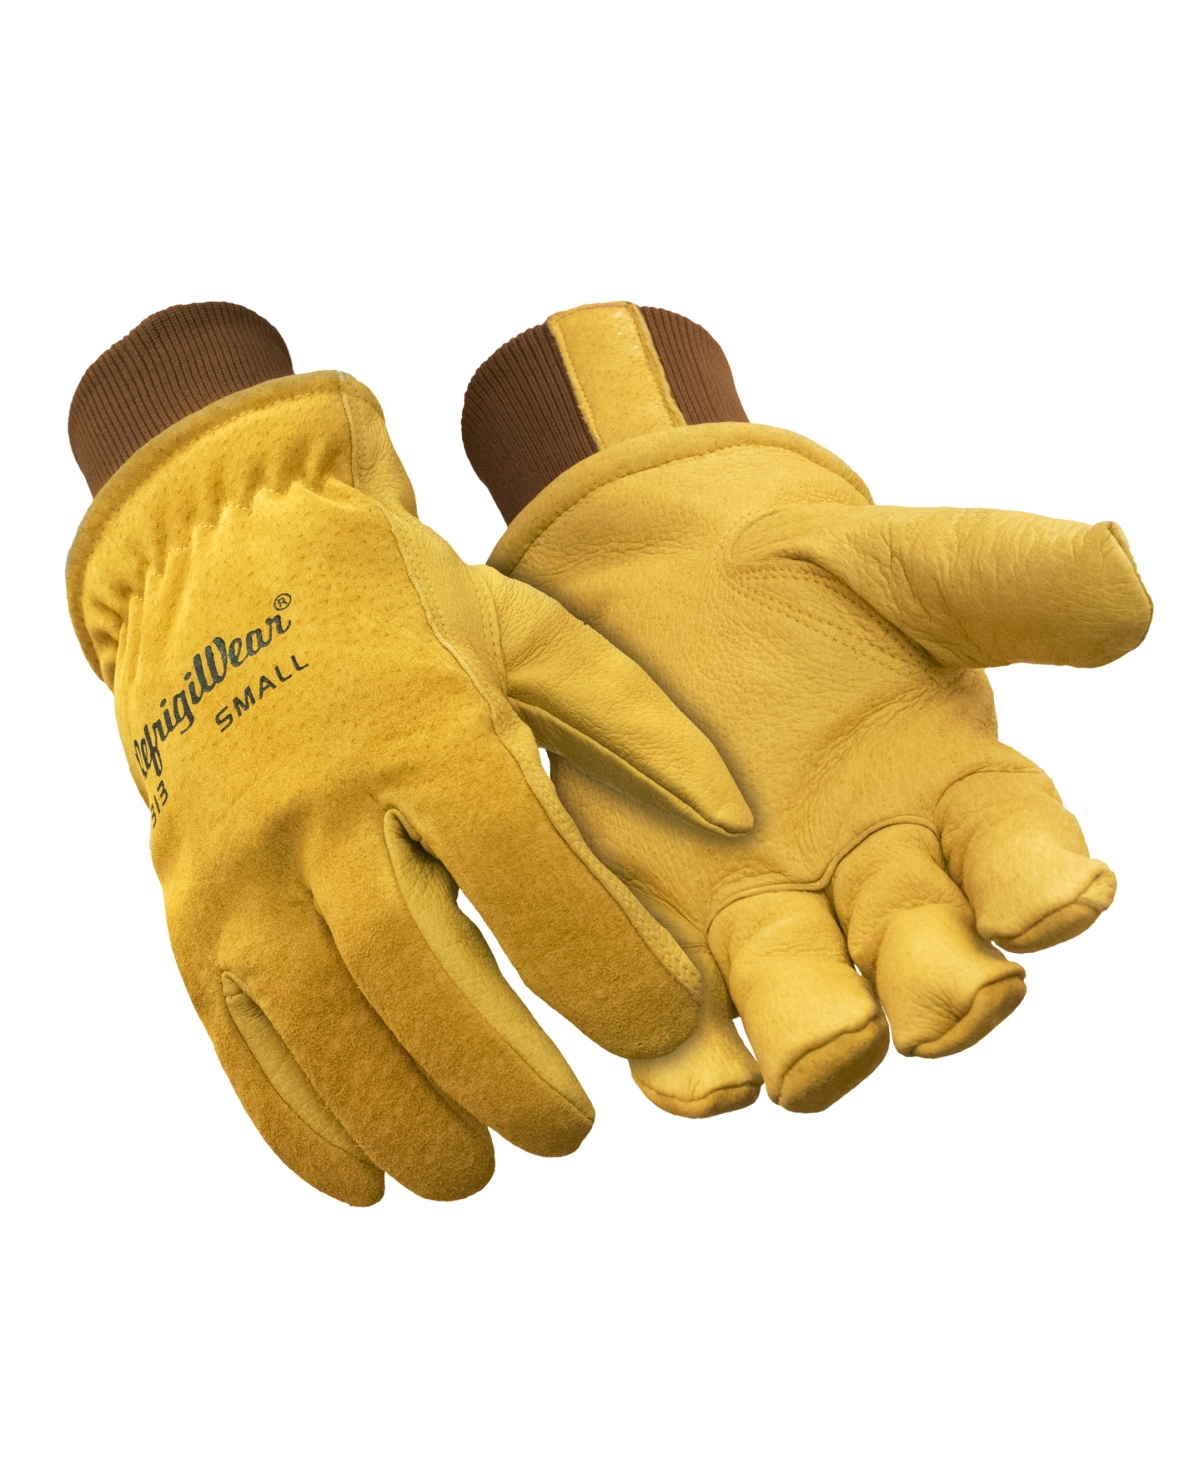 Men's Warm Fleece Lined Fiberfill Insulated Leather Gloves - Gold